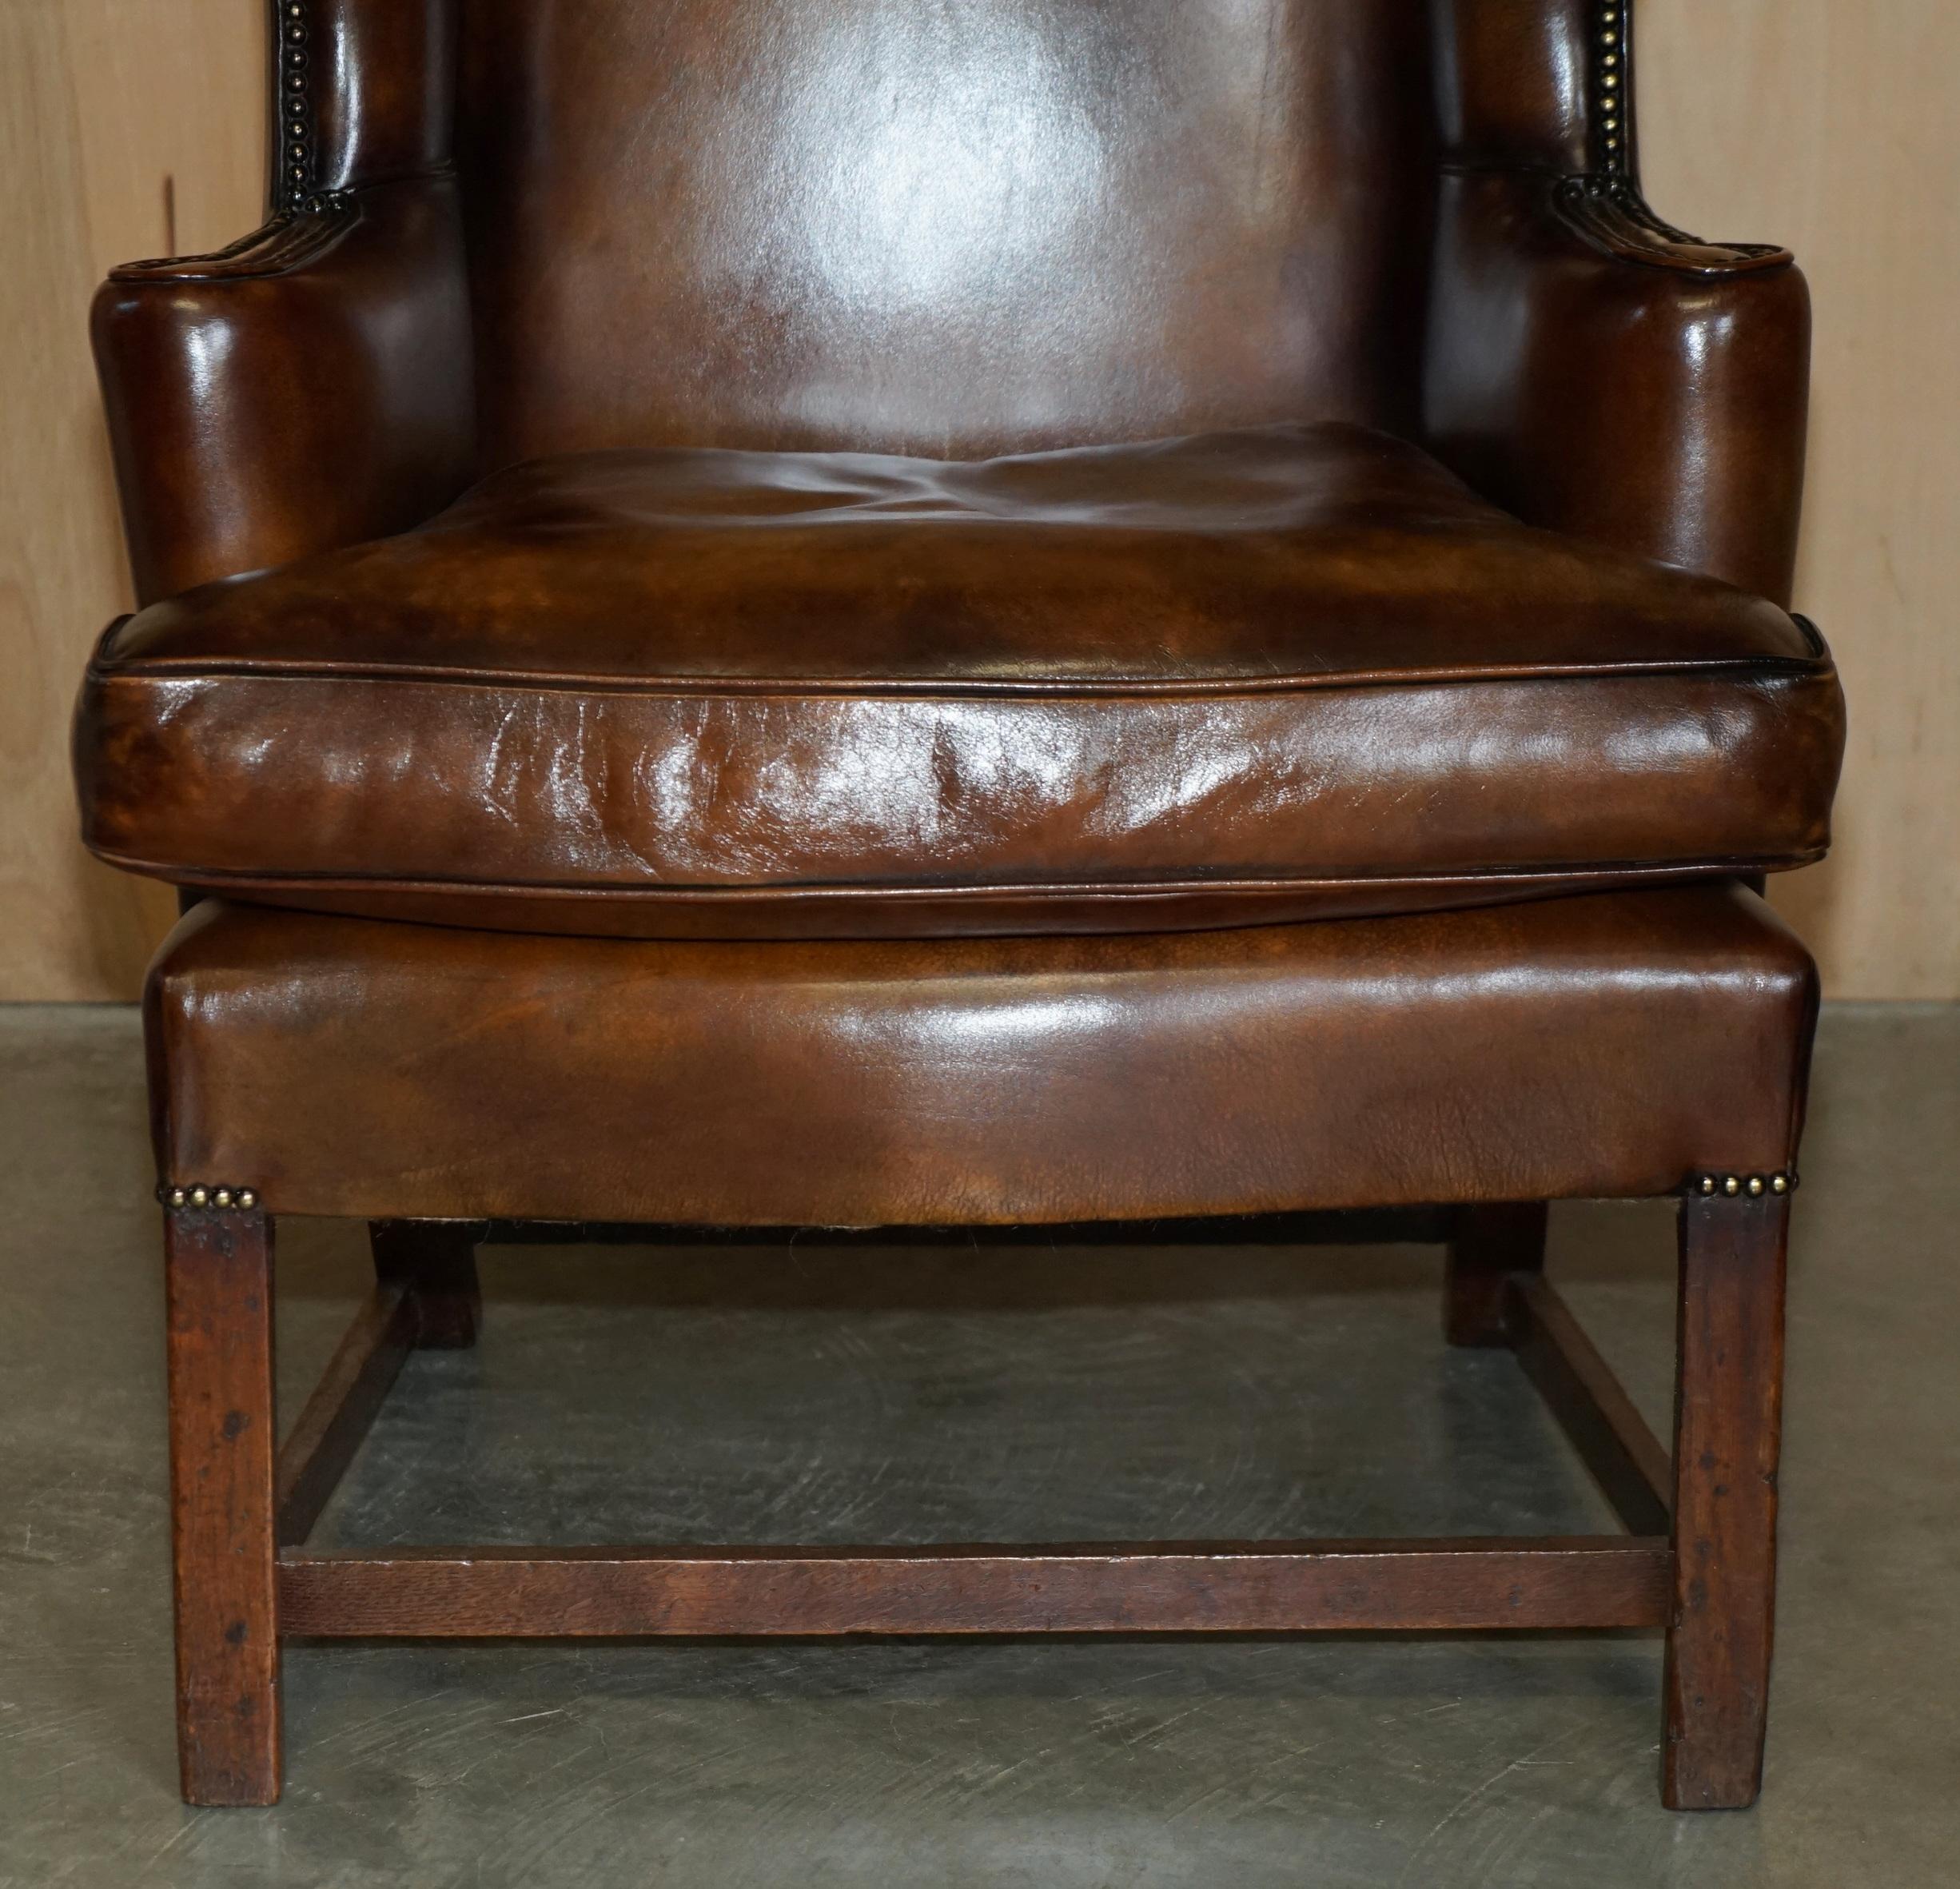 SUPER FINE RESTORED GEORGE III PERIOD CIRCA 1820 WiNGBACK BROWN LEATHER ARMCHAIR For Sale 1